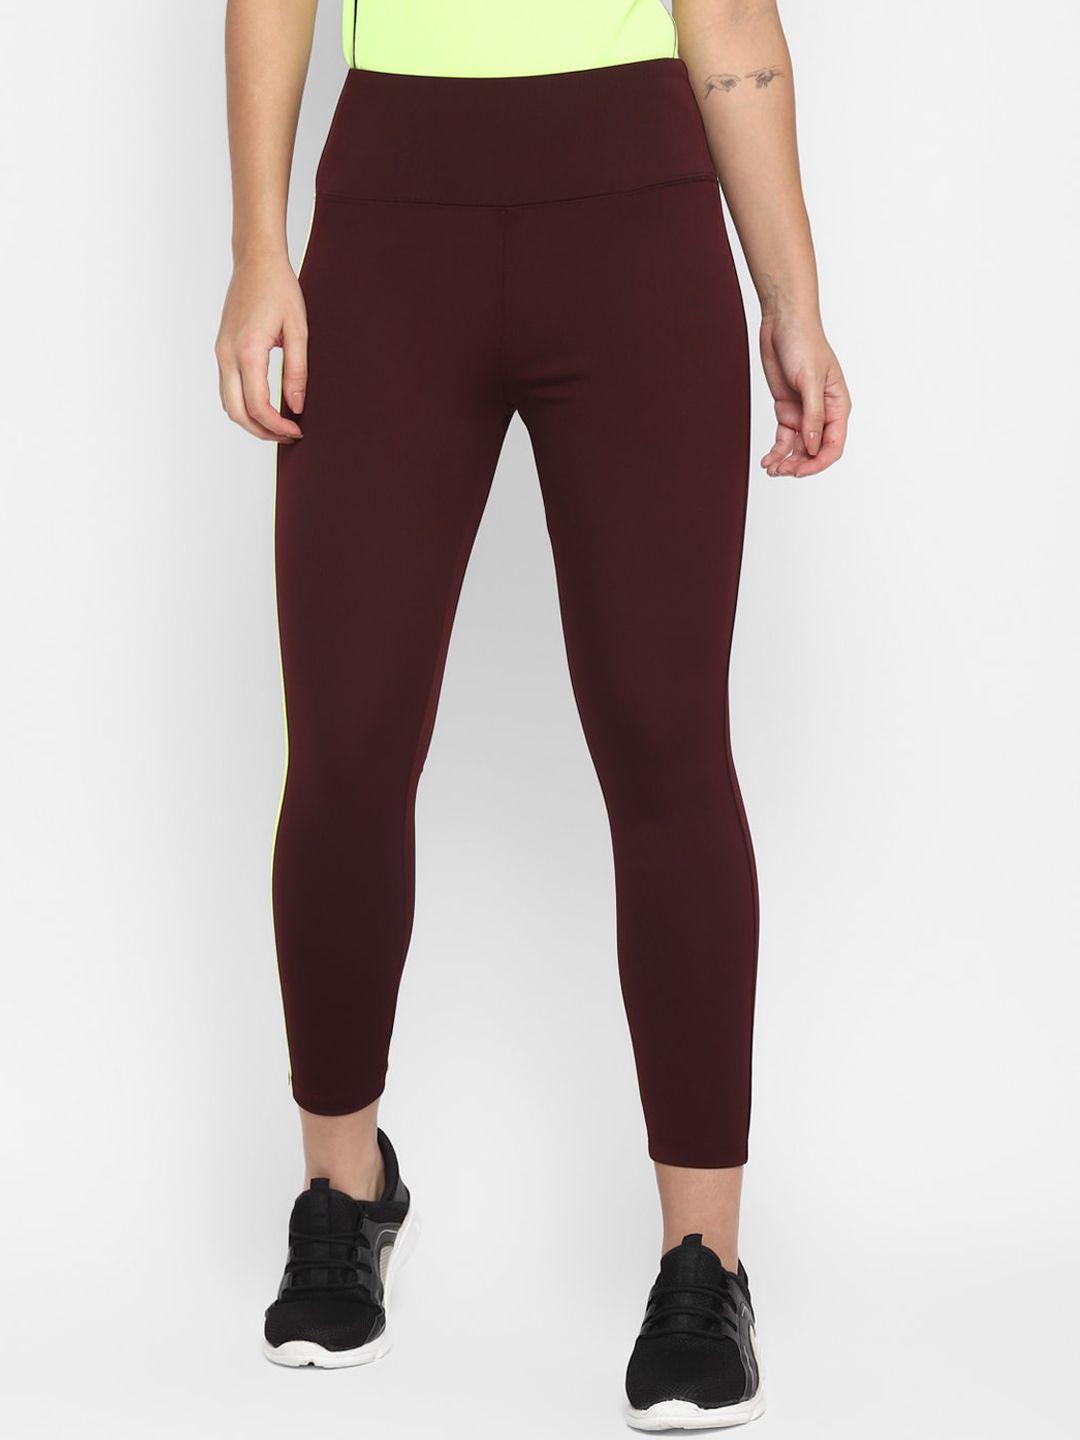 off limits women maroon solid antimicrobial tights